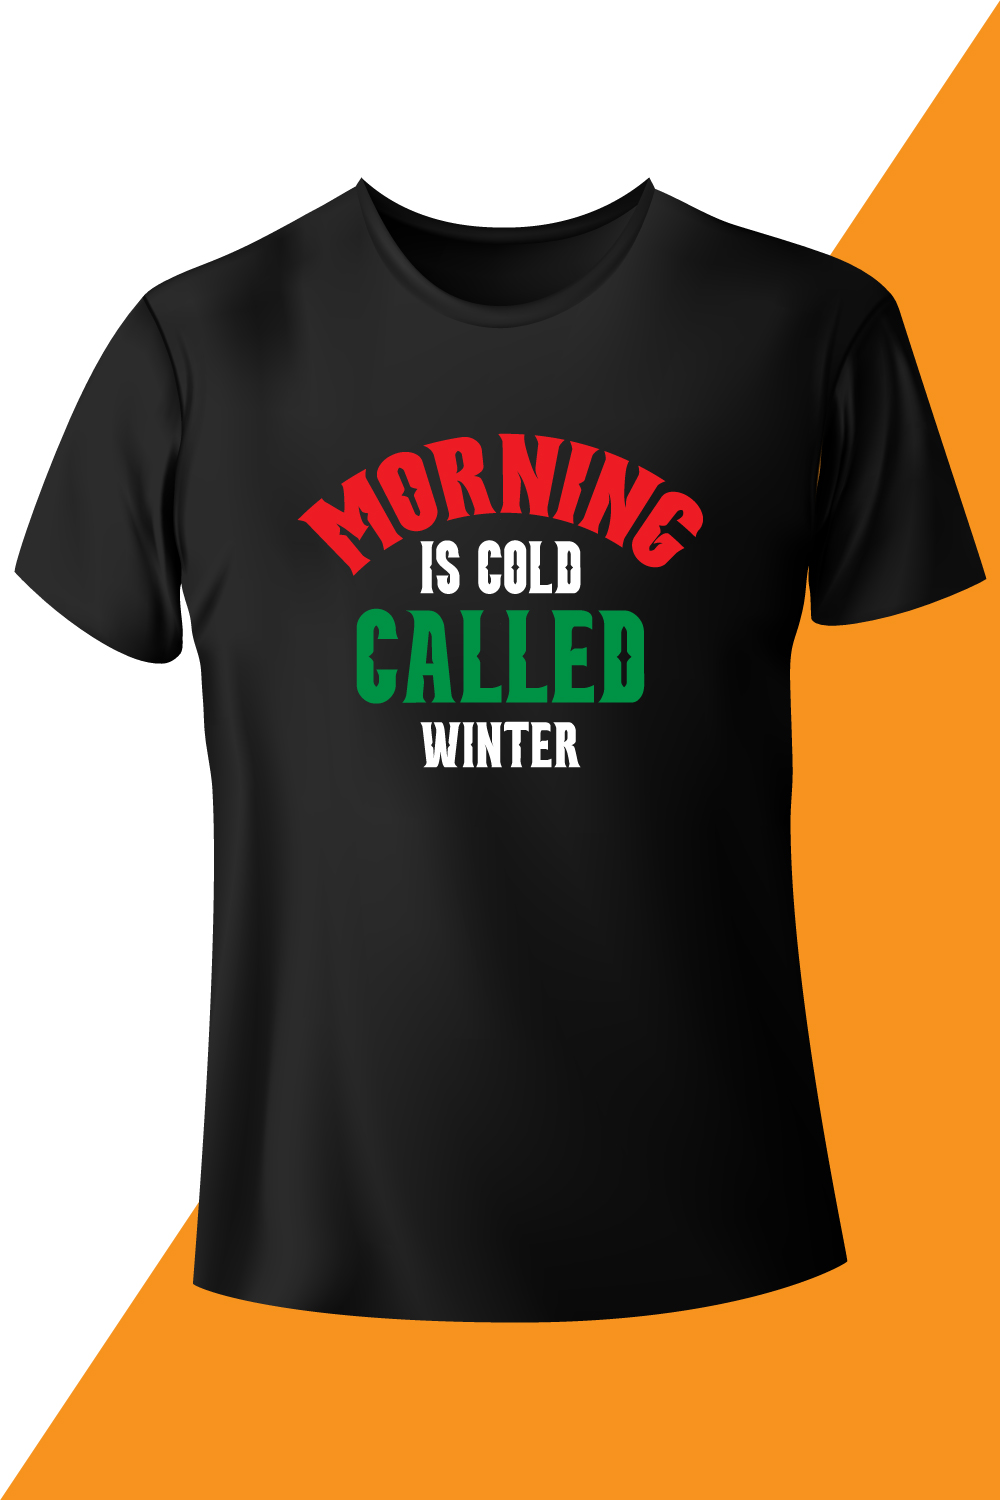 Image of a black t-shirt with a unique inscription morning is cold called winter.